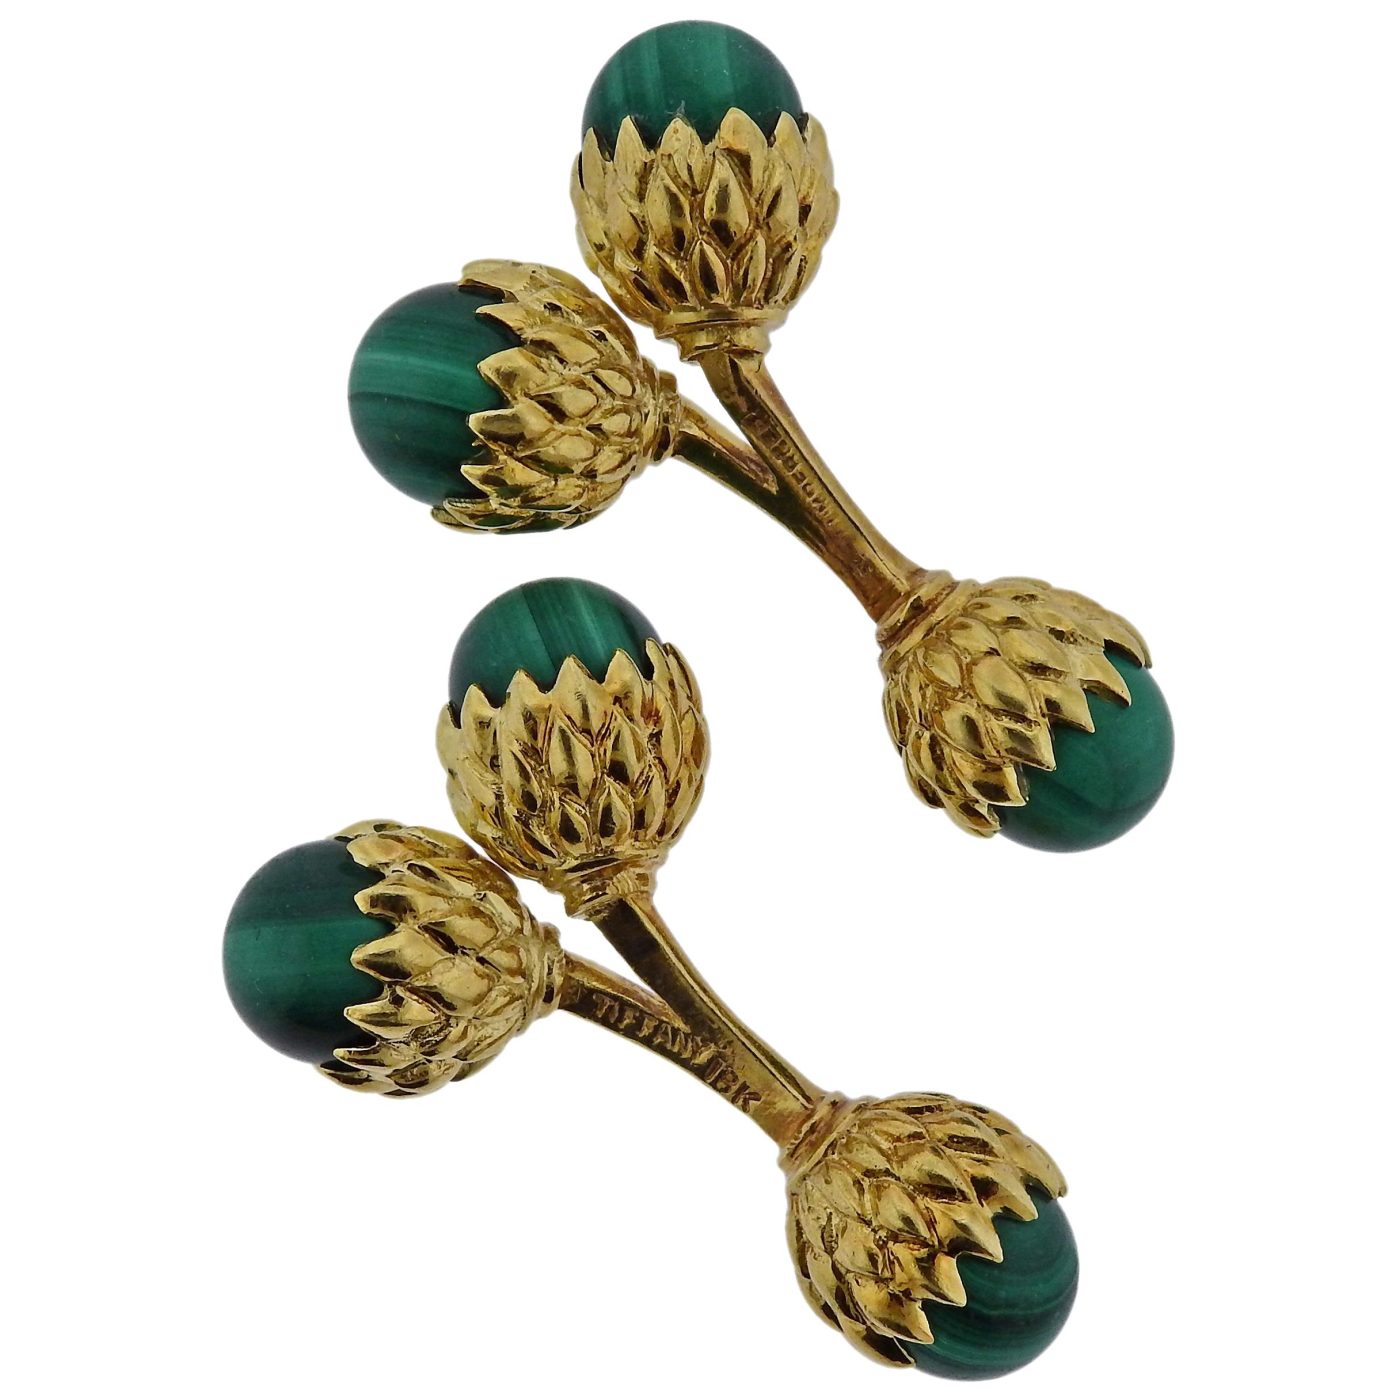 gold and malachite acorn cufflinks, 20th century, by Schlumberger for Tiffany & Co.